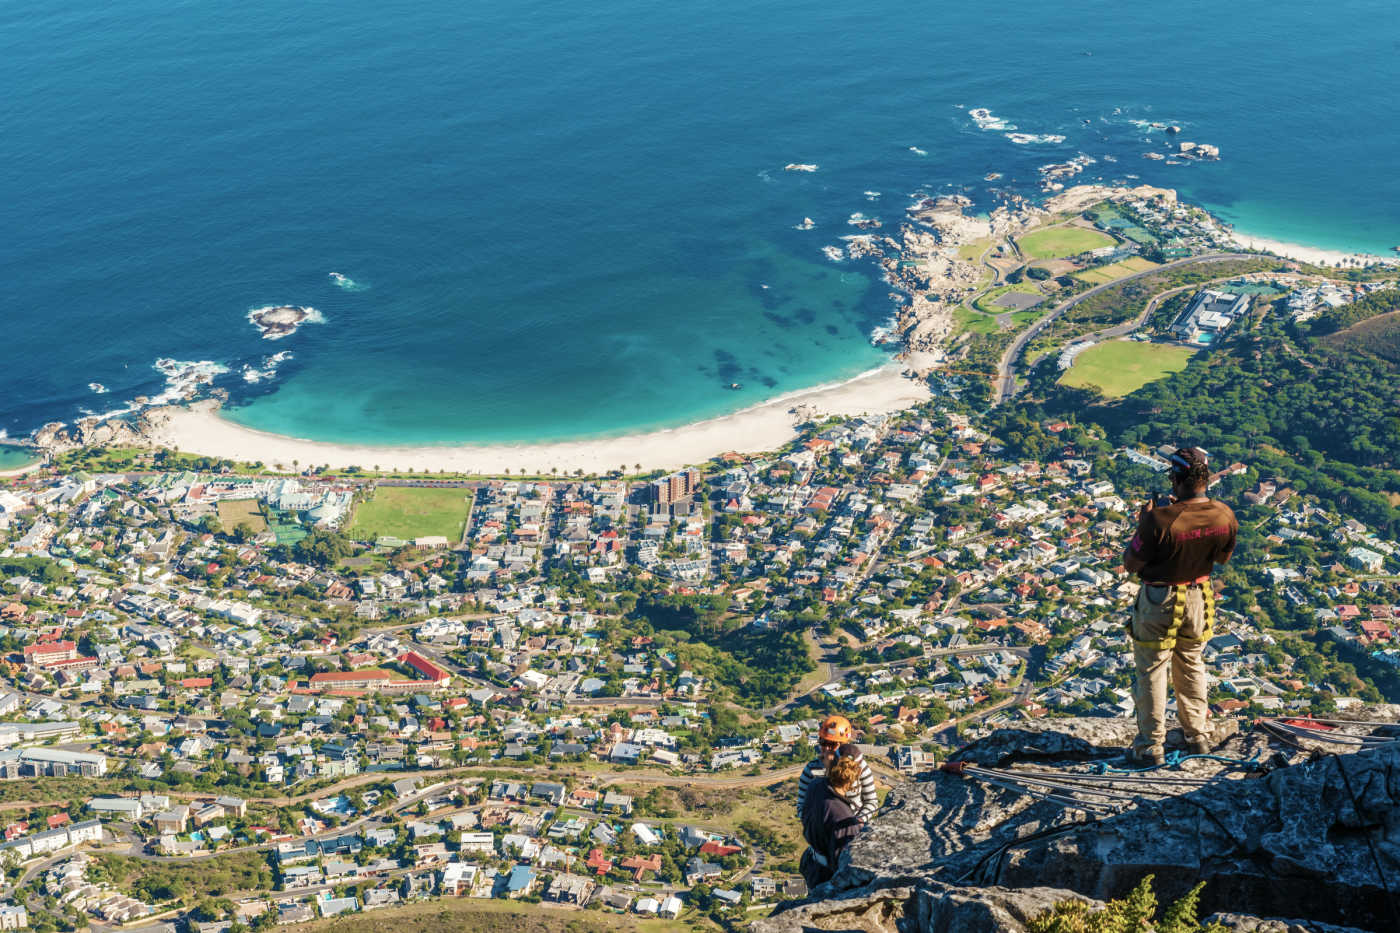 Cape Town vacation packages from $802